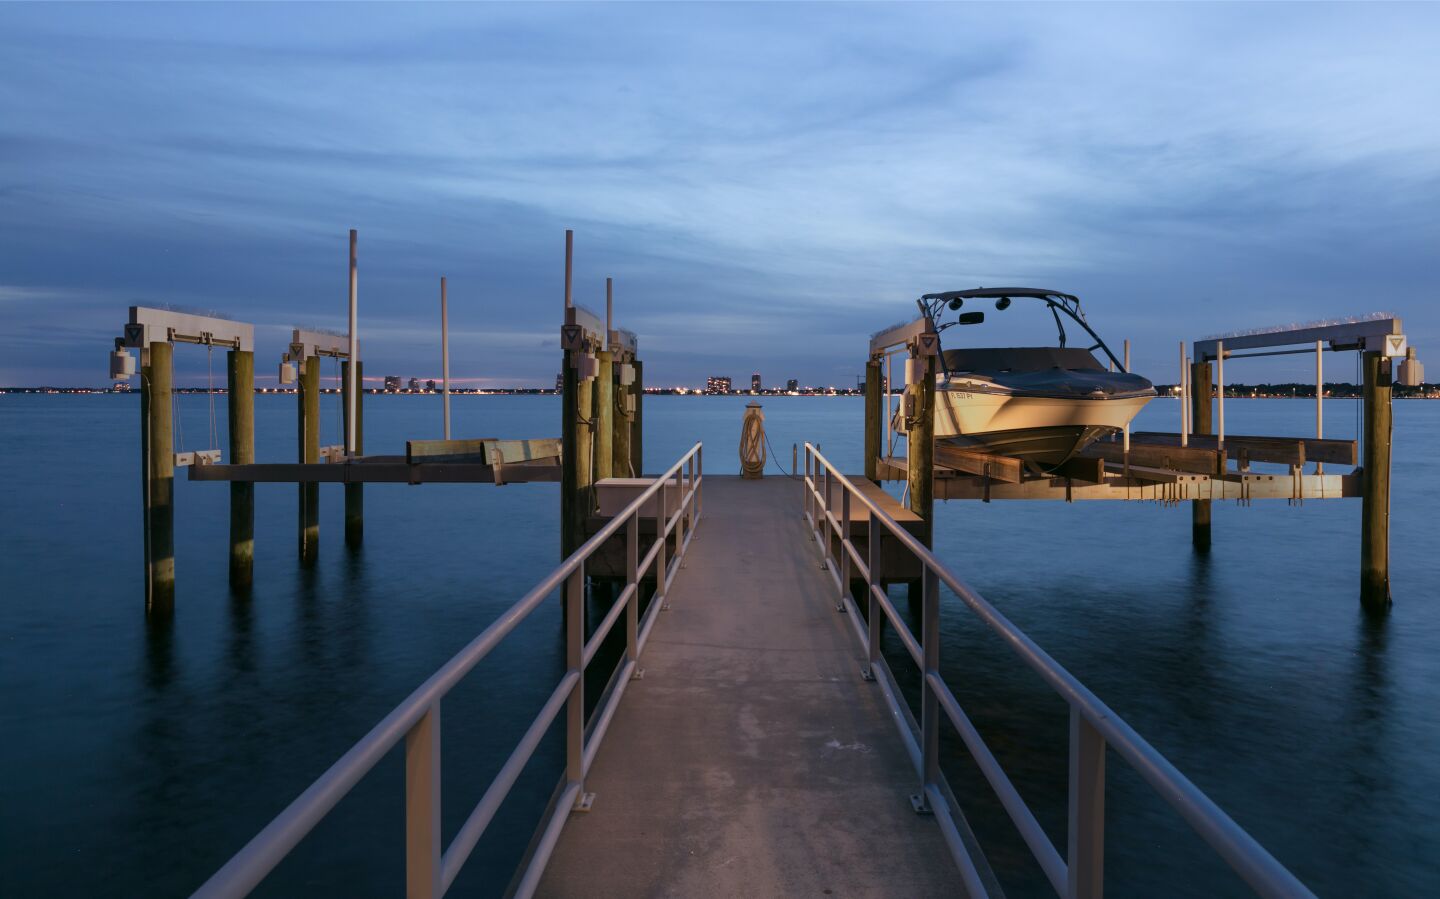 A boat occupies the dock; in the distance are city lights.